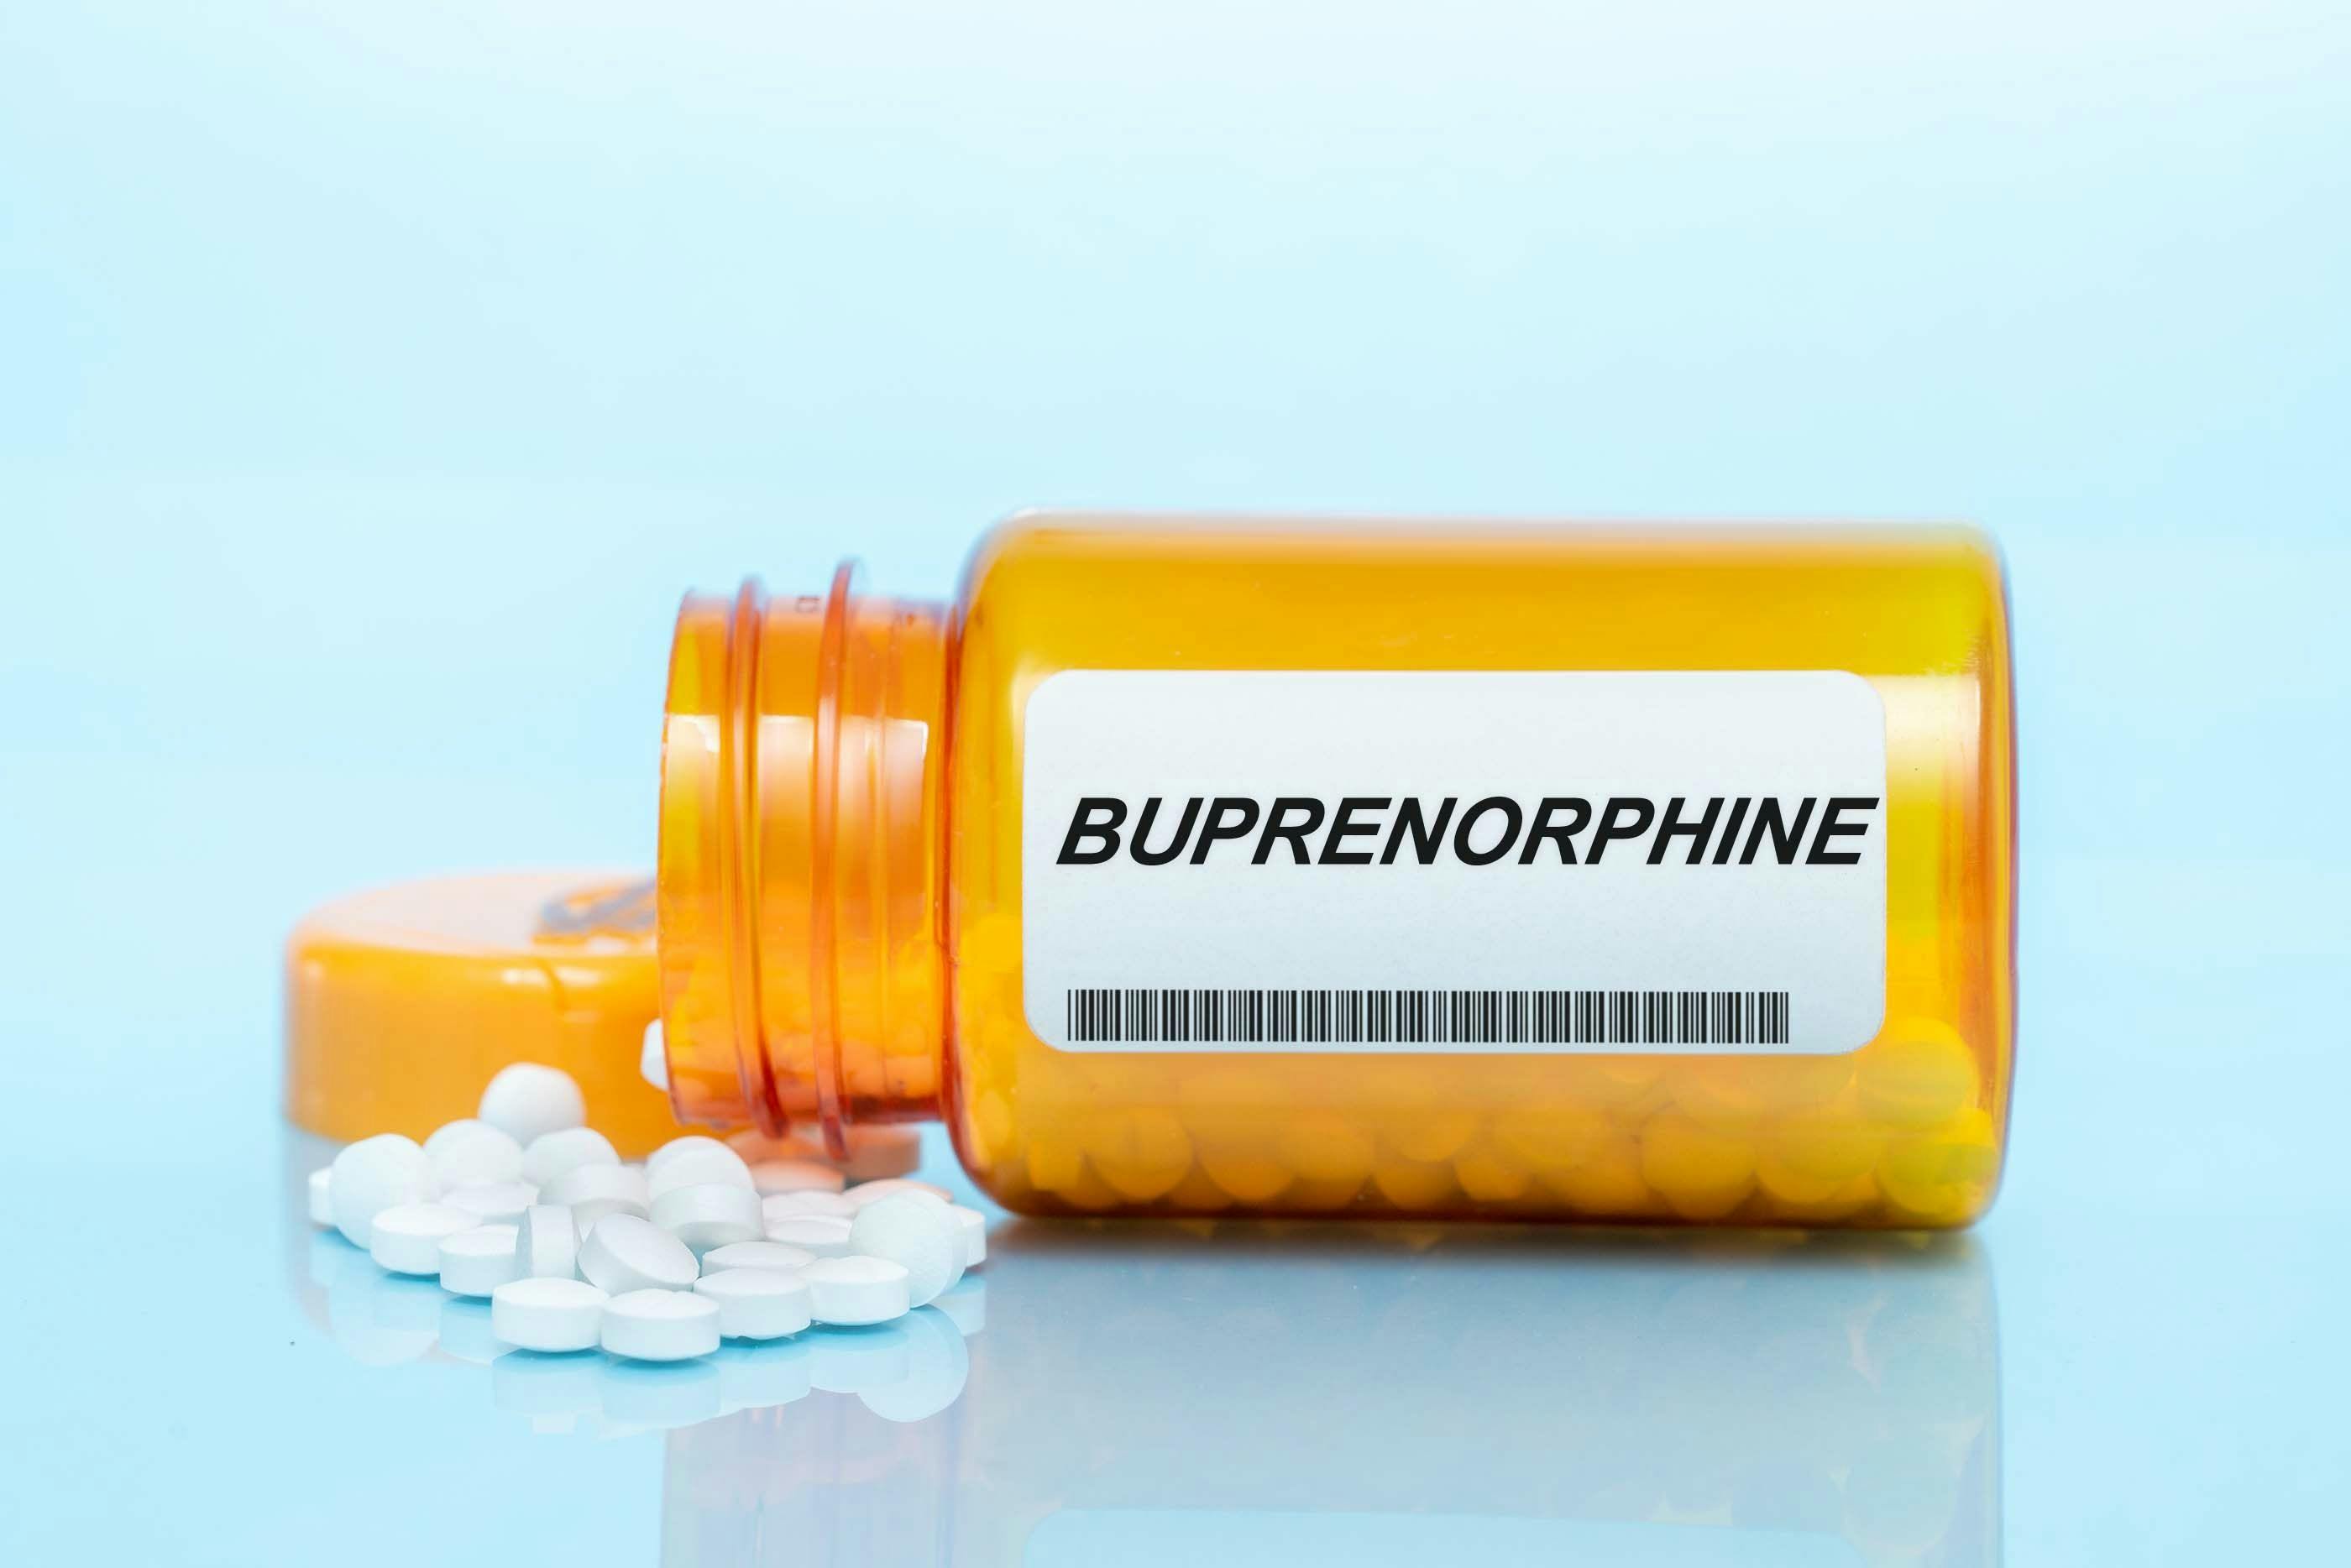 Could Higher Doses of Buprenorphine Help People With OUD Stay in Treatment?